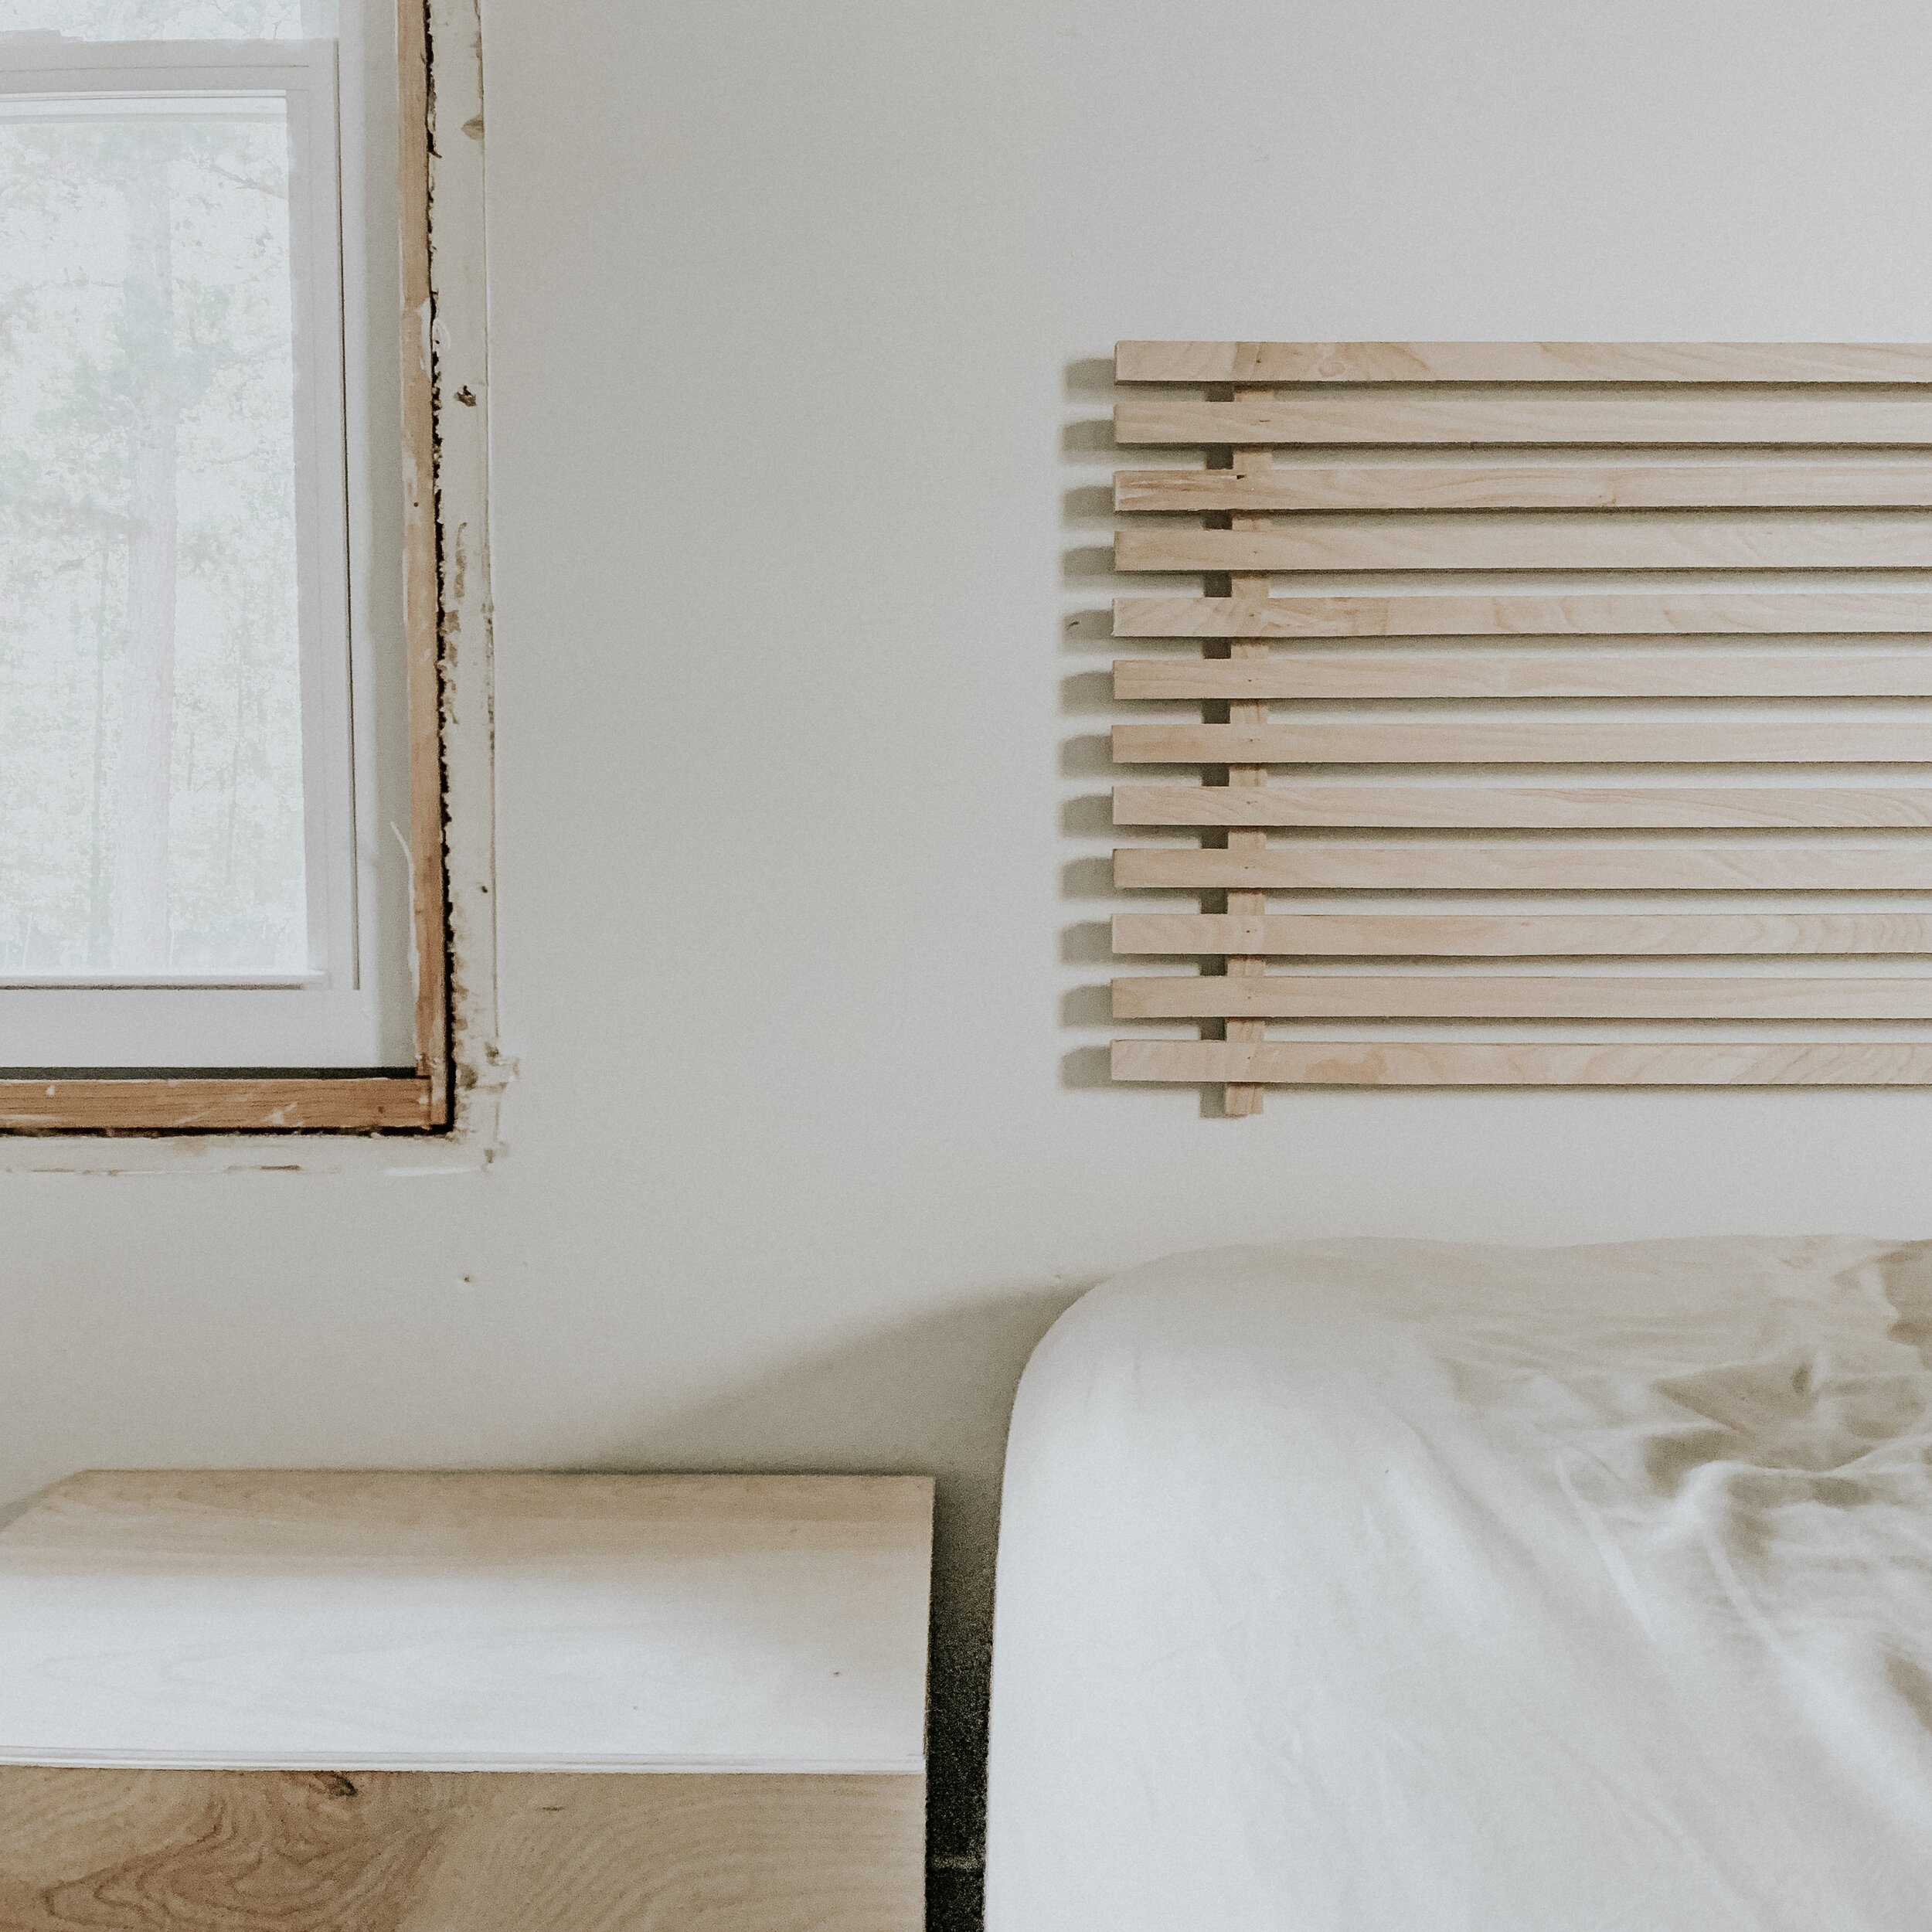 This Minimal House Diy Minimalism, How To Make A Wood Slat Bed Frame